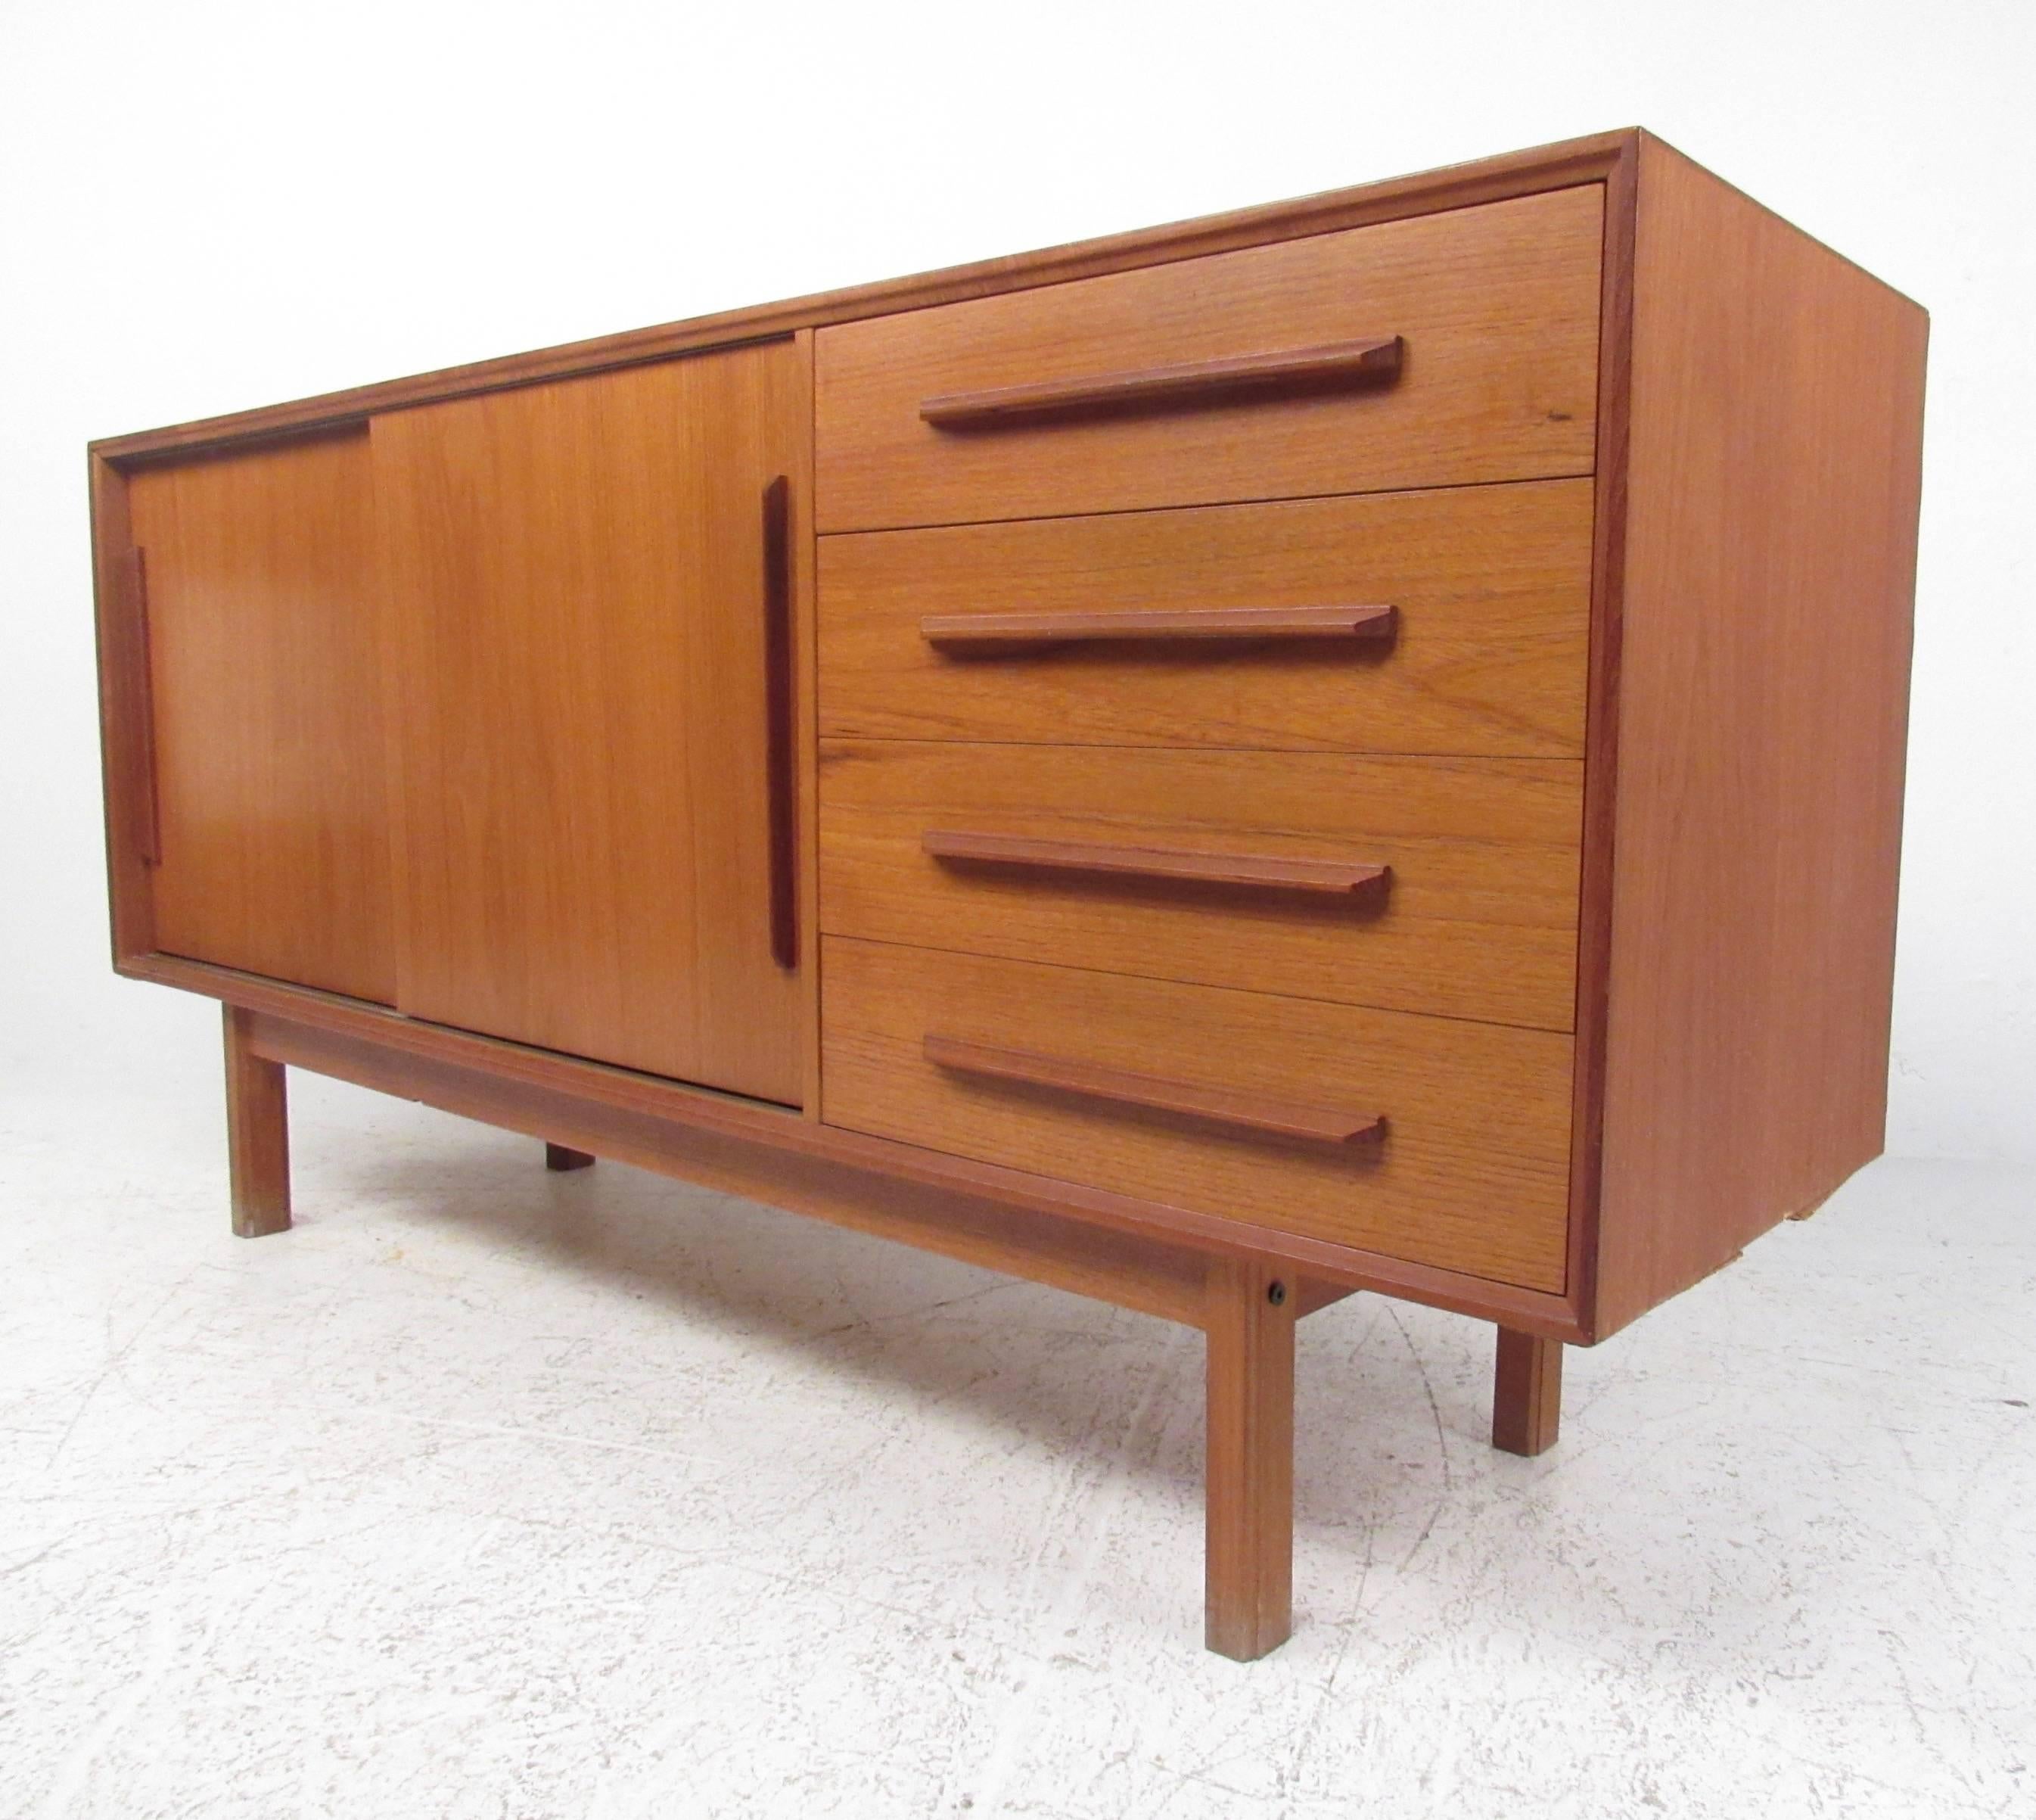 This uniquely sized sliding door credenza features a beautiful Mid-Century teak finish with impressive carved pulls. Four drawers and a spacious shelved cabinet provide plenty of storage in this petite cabinet, ideal for use as a TV console or